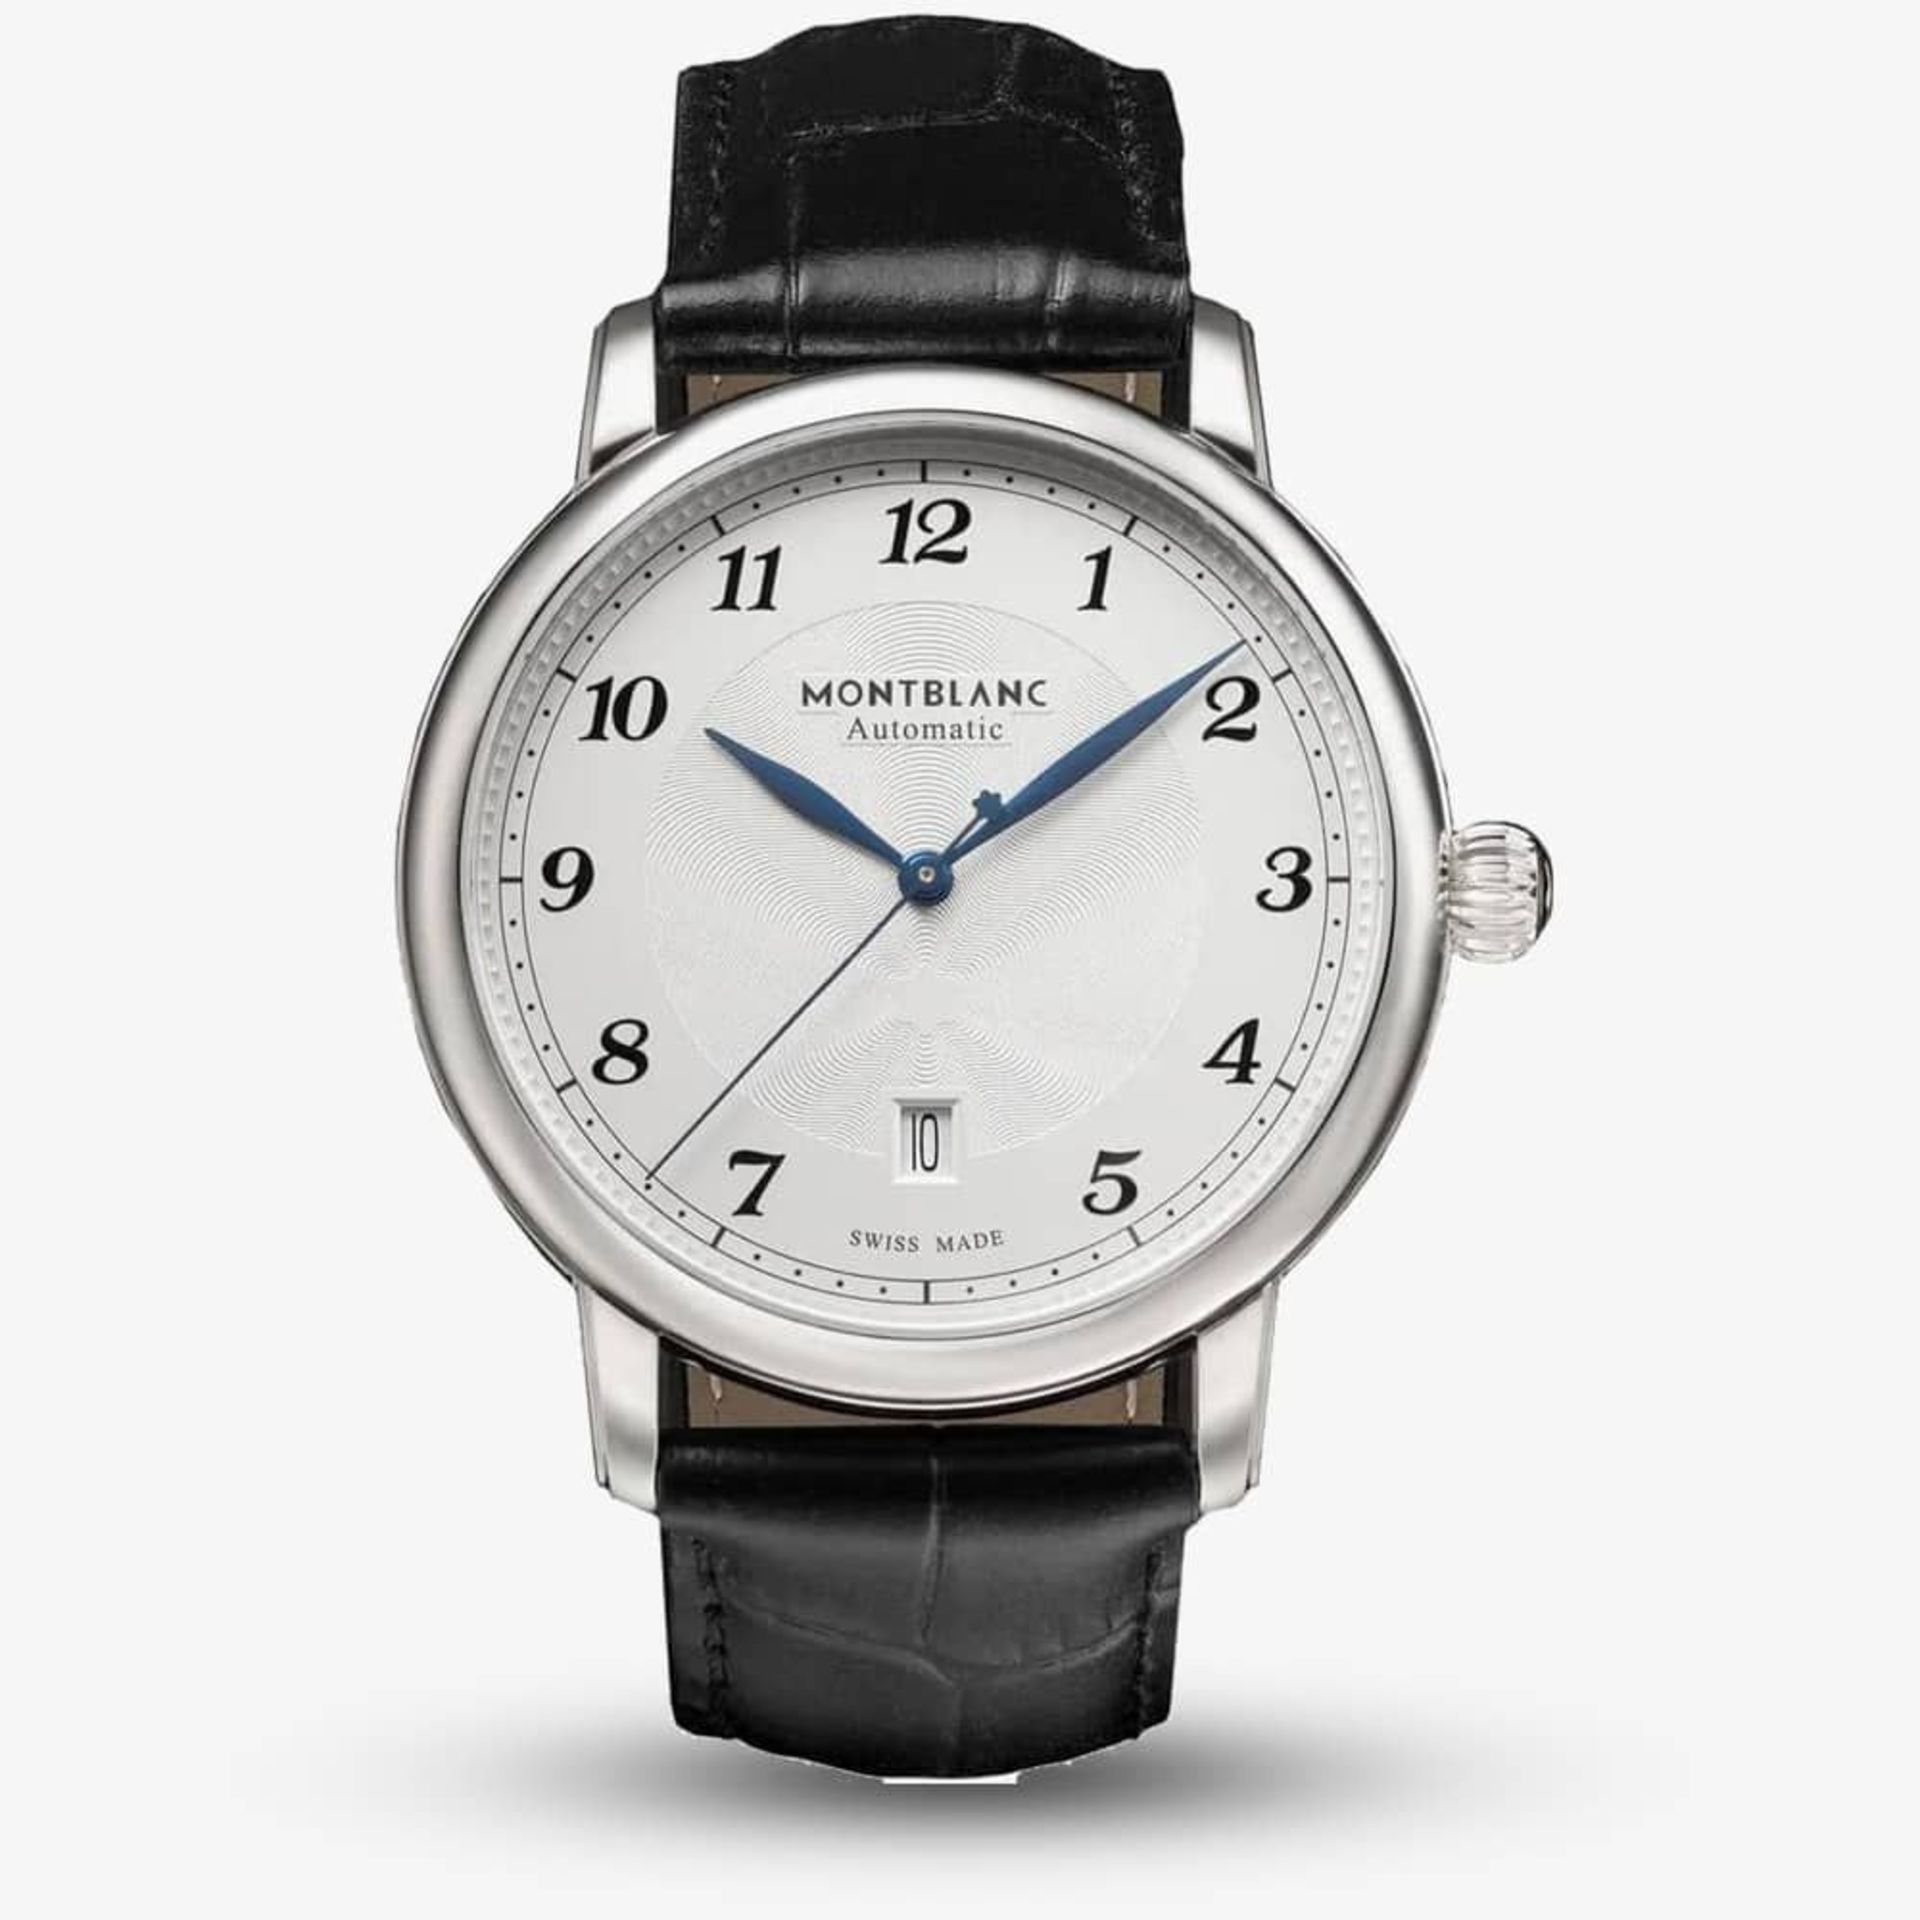 BRAND NEW MONTBLANC MENS STAR LEGACY AUTOMATIC WHITE DIAL WATCH (687) RRP £2800